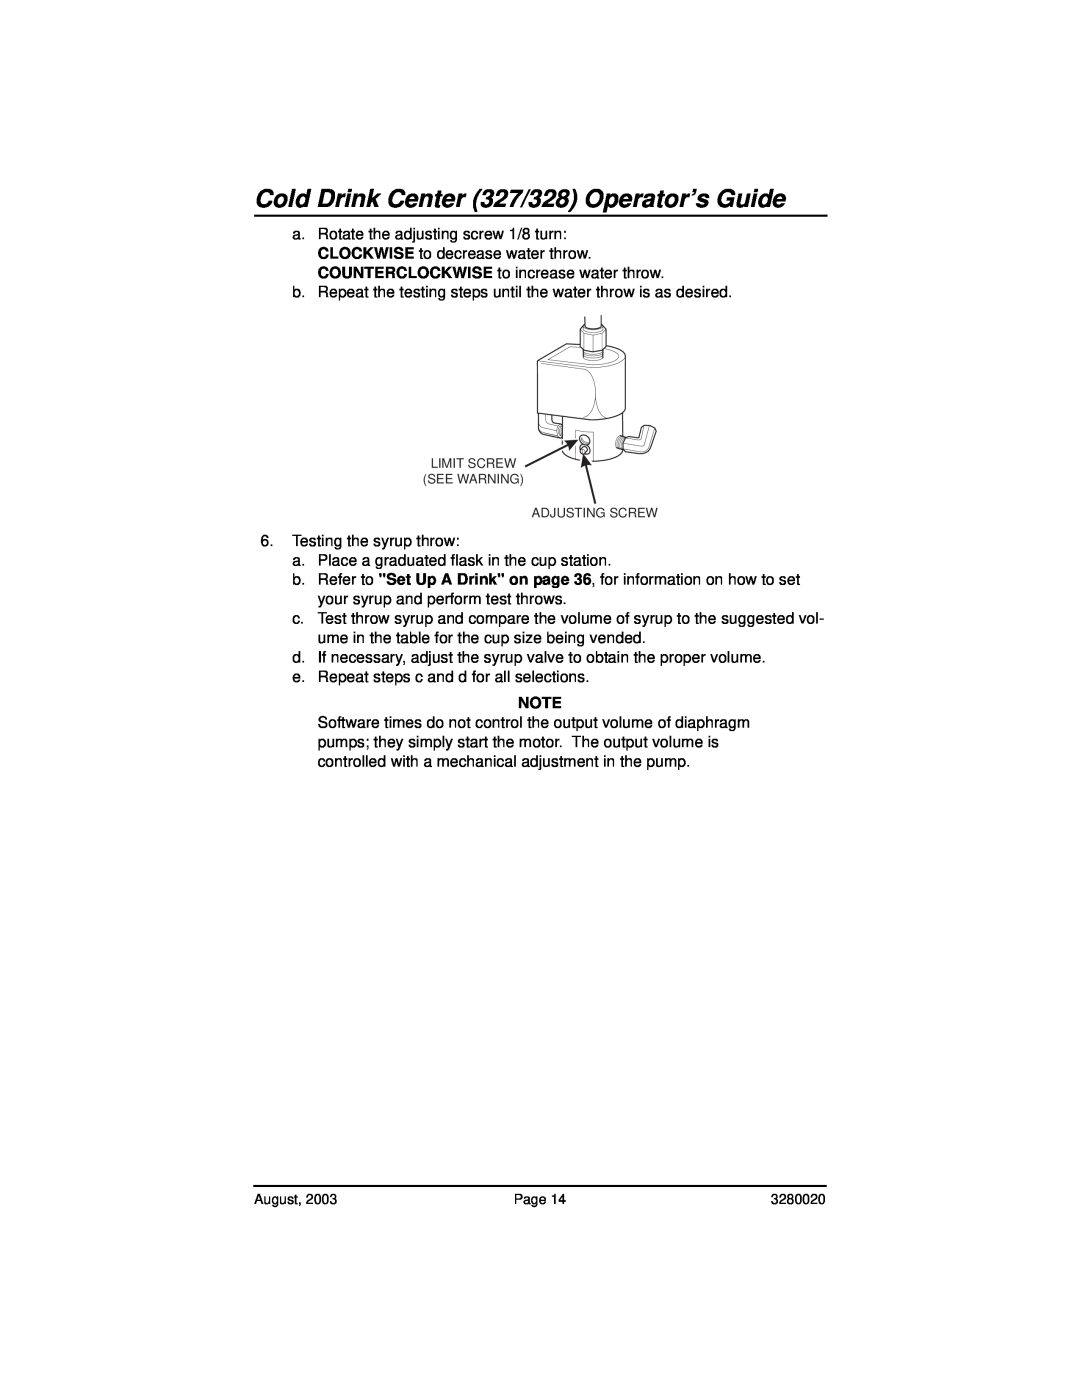 Everpure 325 manual Cold Drink Center 327/328 Operator’s Guide, Testing the syrup throw 